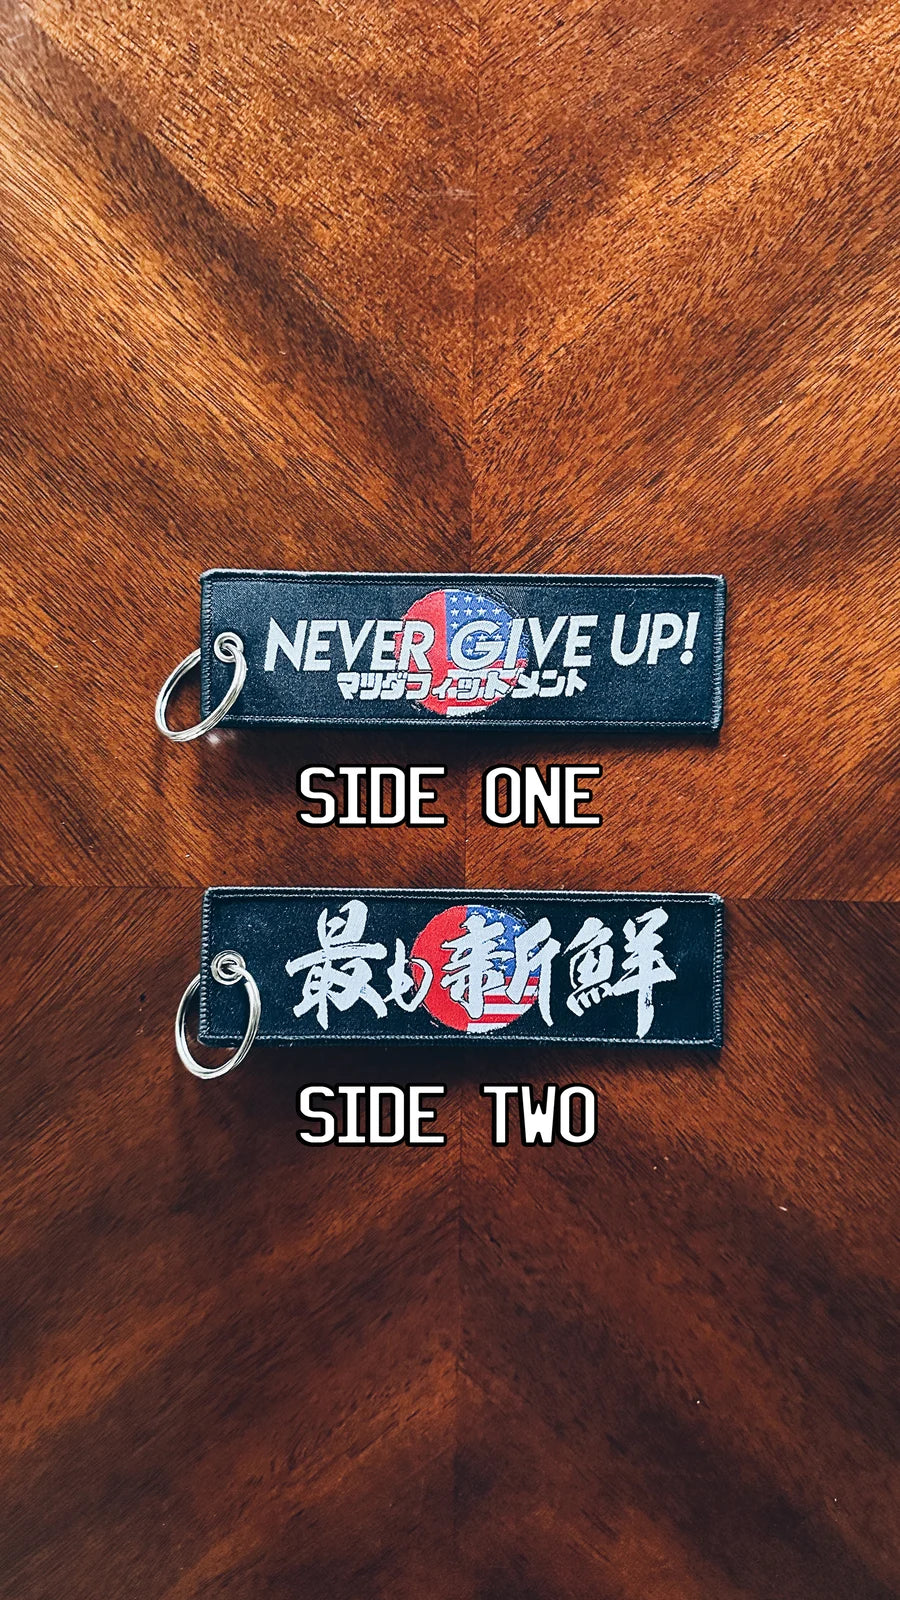 NEVER GIVE UP! - JET TAG